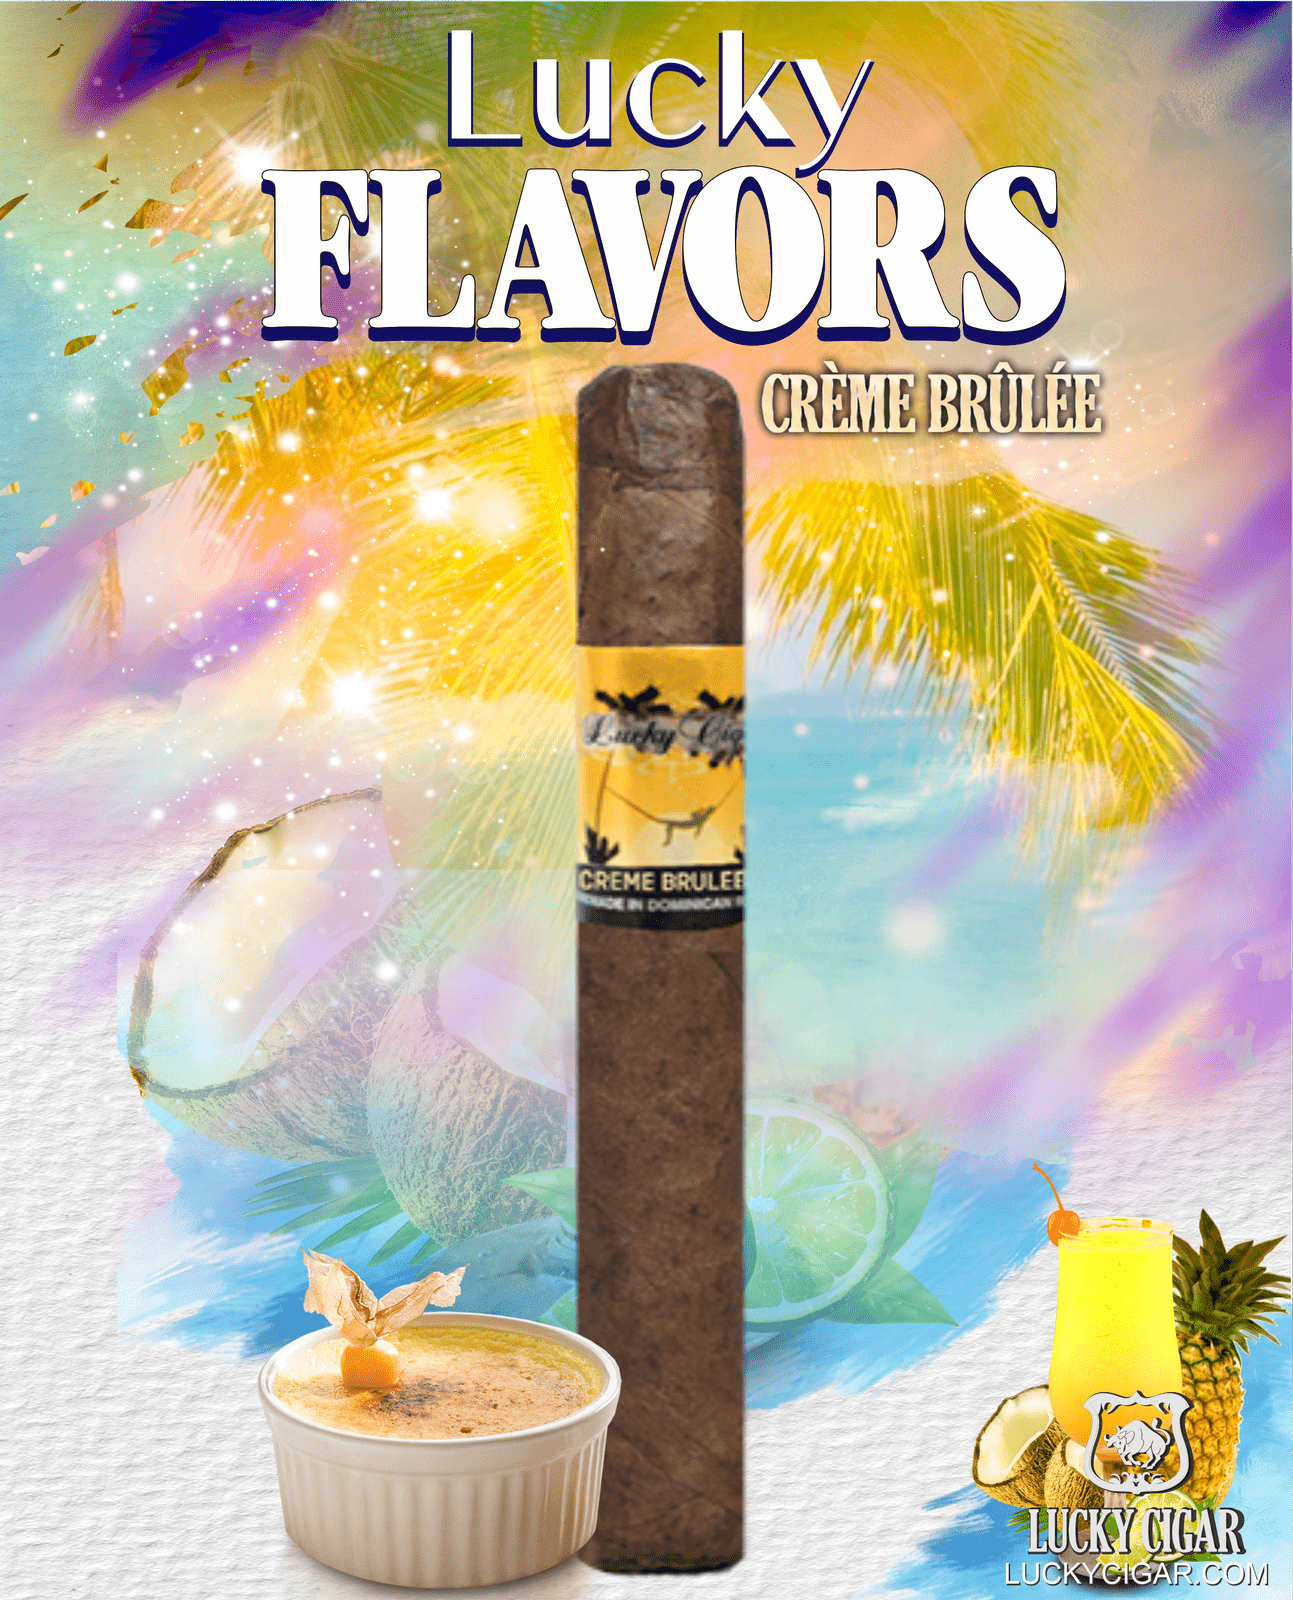 Creme Brulee - Lucky Flavors Collection by The House of Lucky Cigar